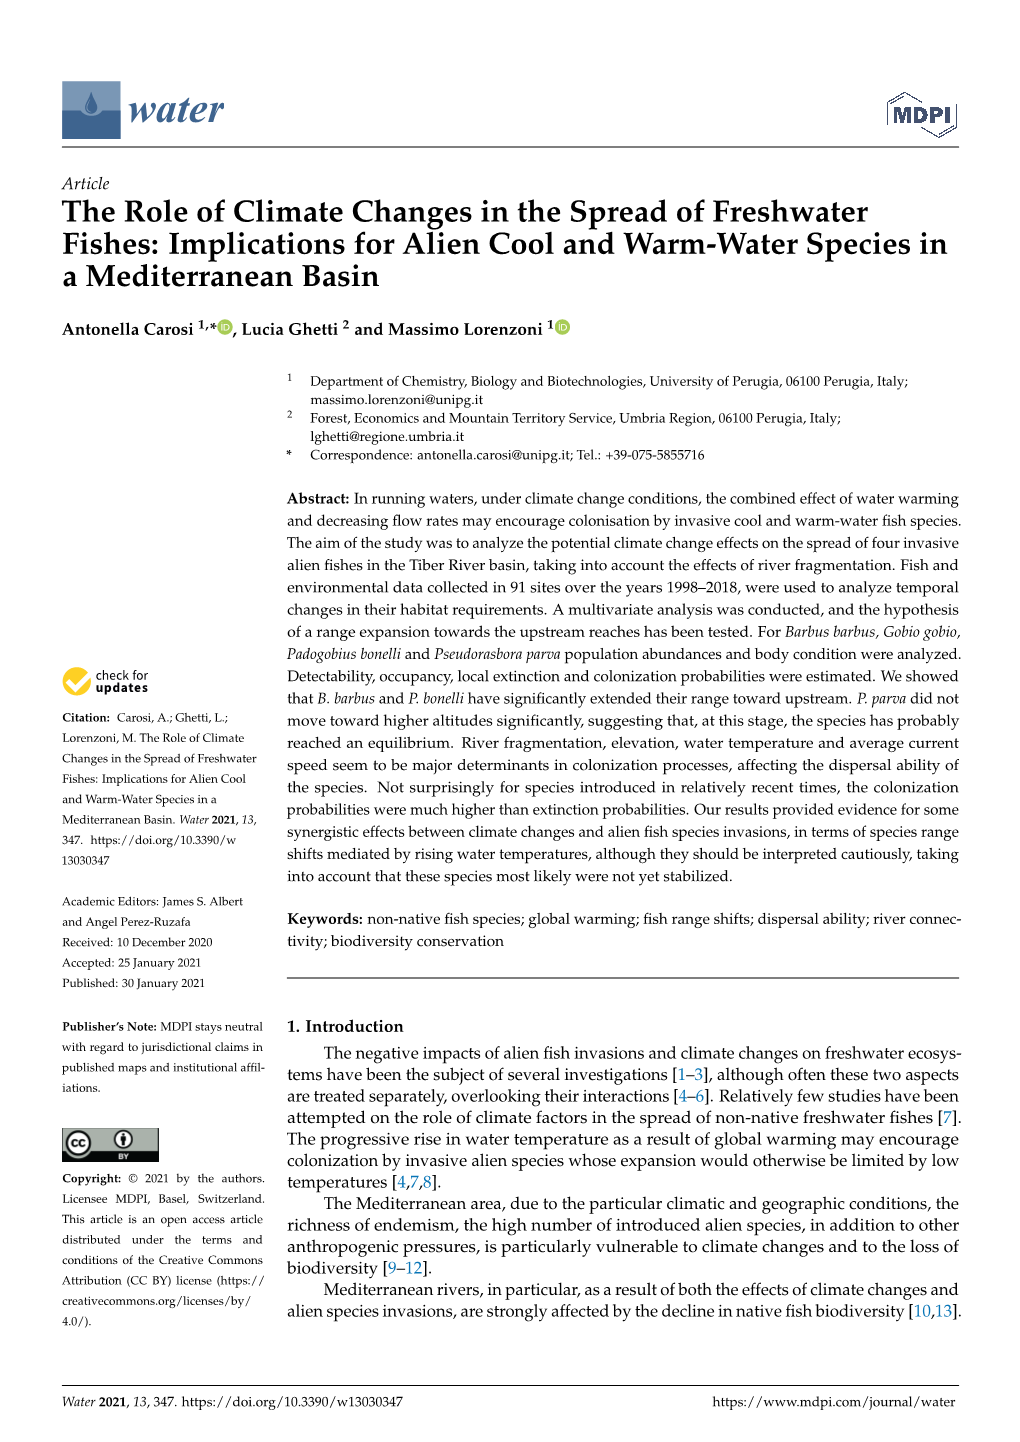 The Role of Climate Changes in the Spread of Freshwater Fishes: Implications for Alien Cool and Warm-Water Species in a Mediterranean Basin